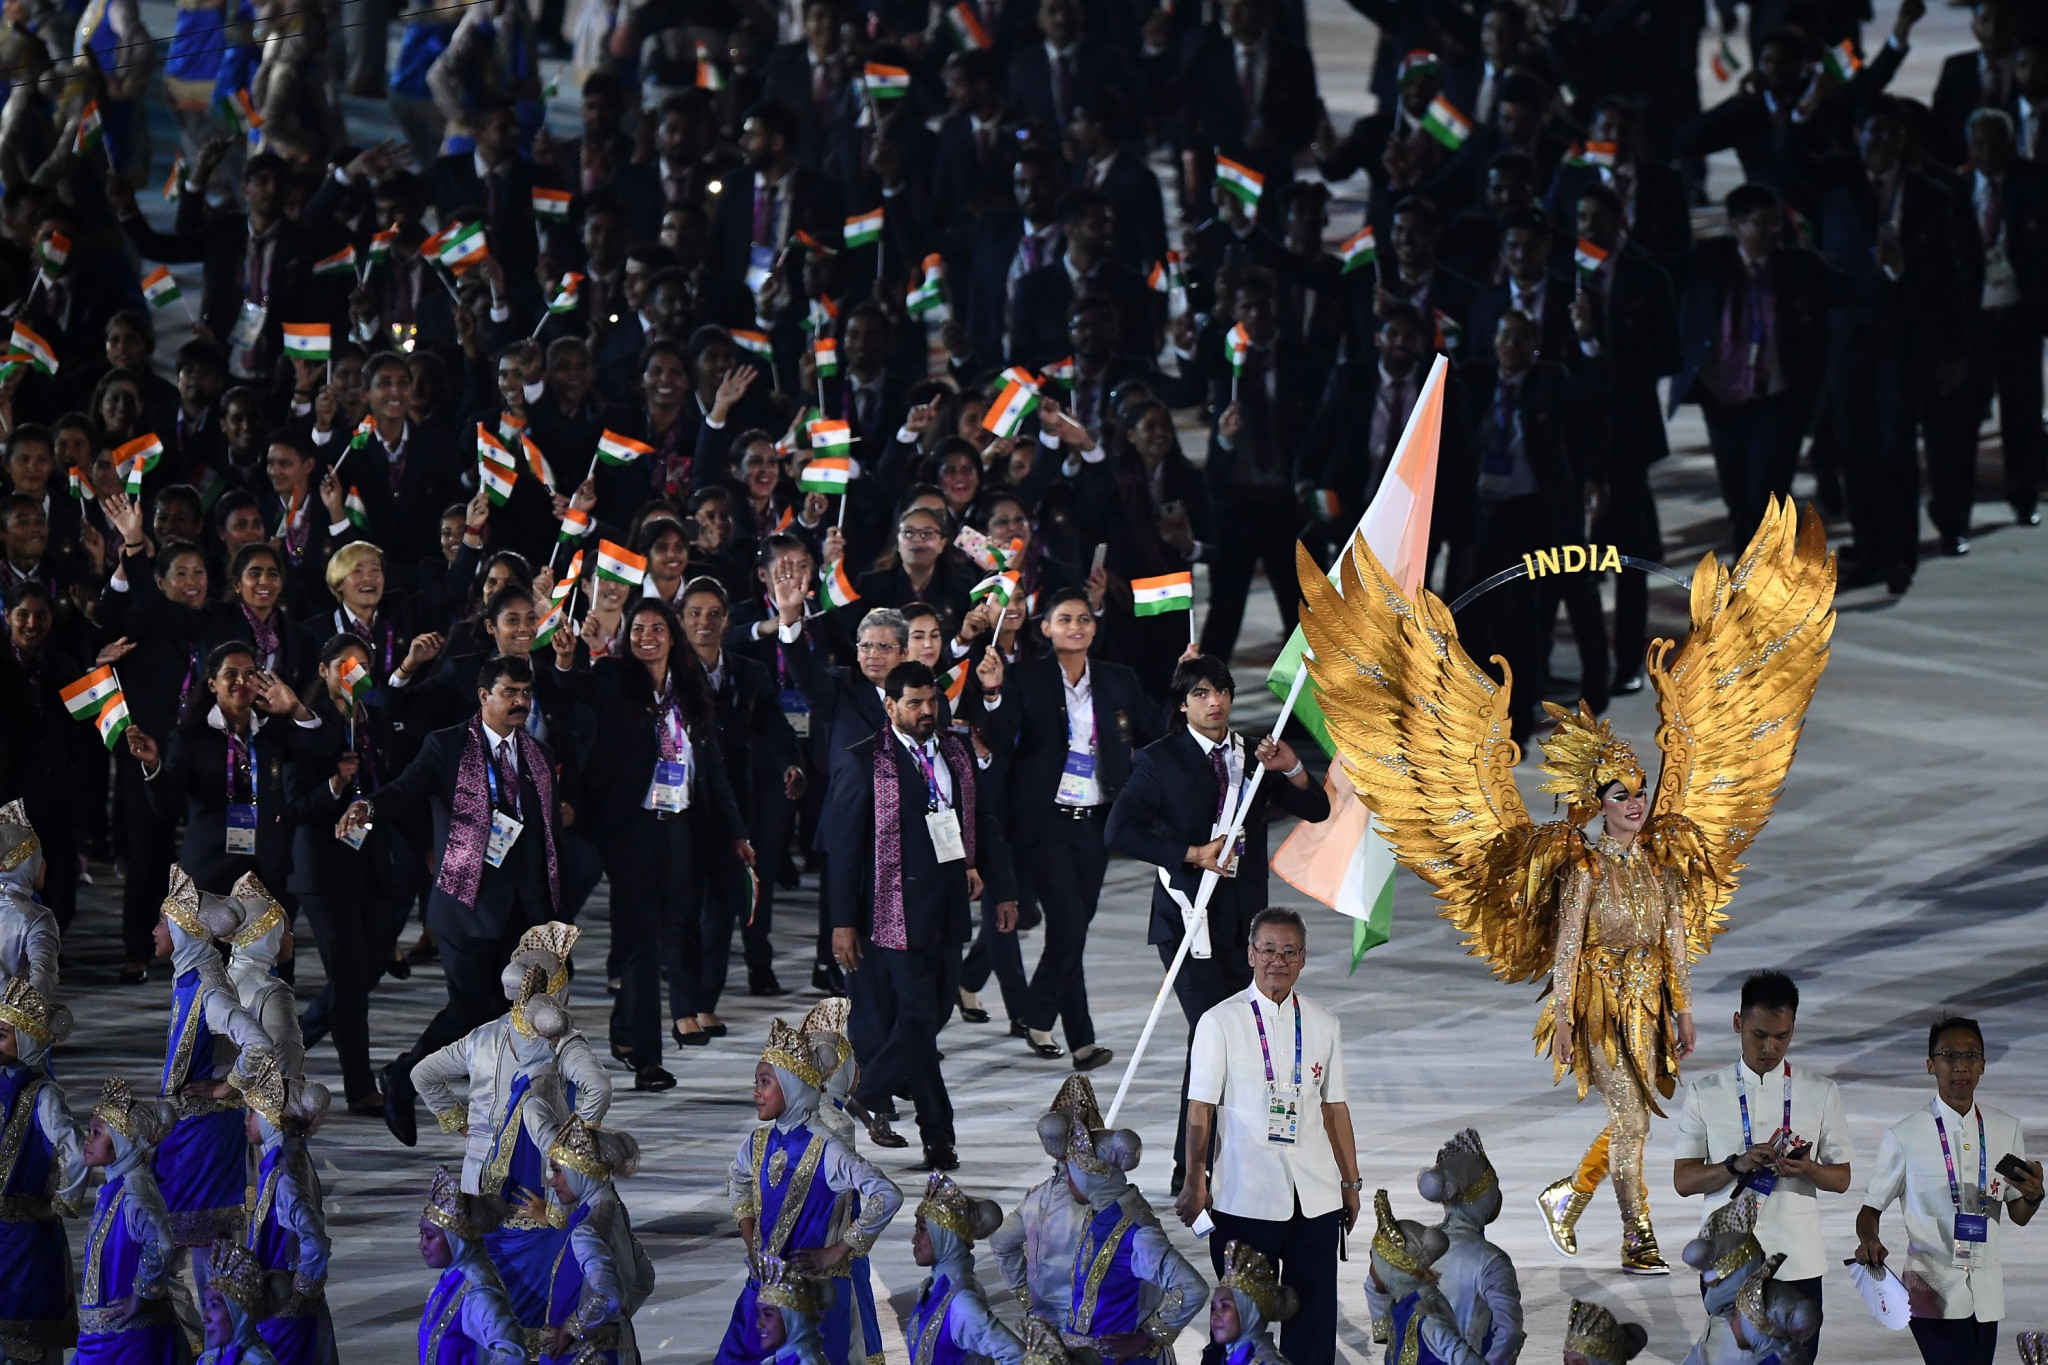 Bajwa named India's Chef de Mission for Hangzhou 2022 Asian Games